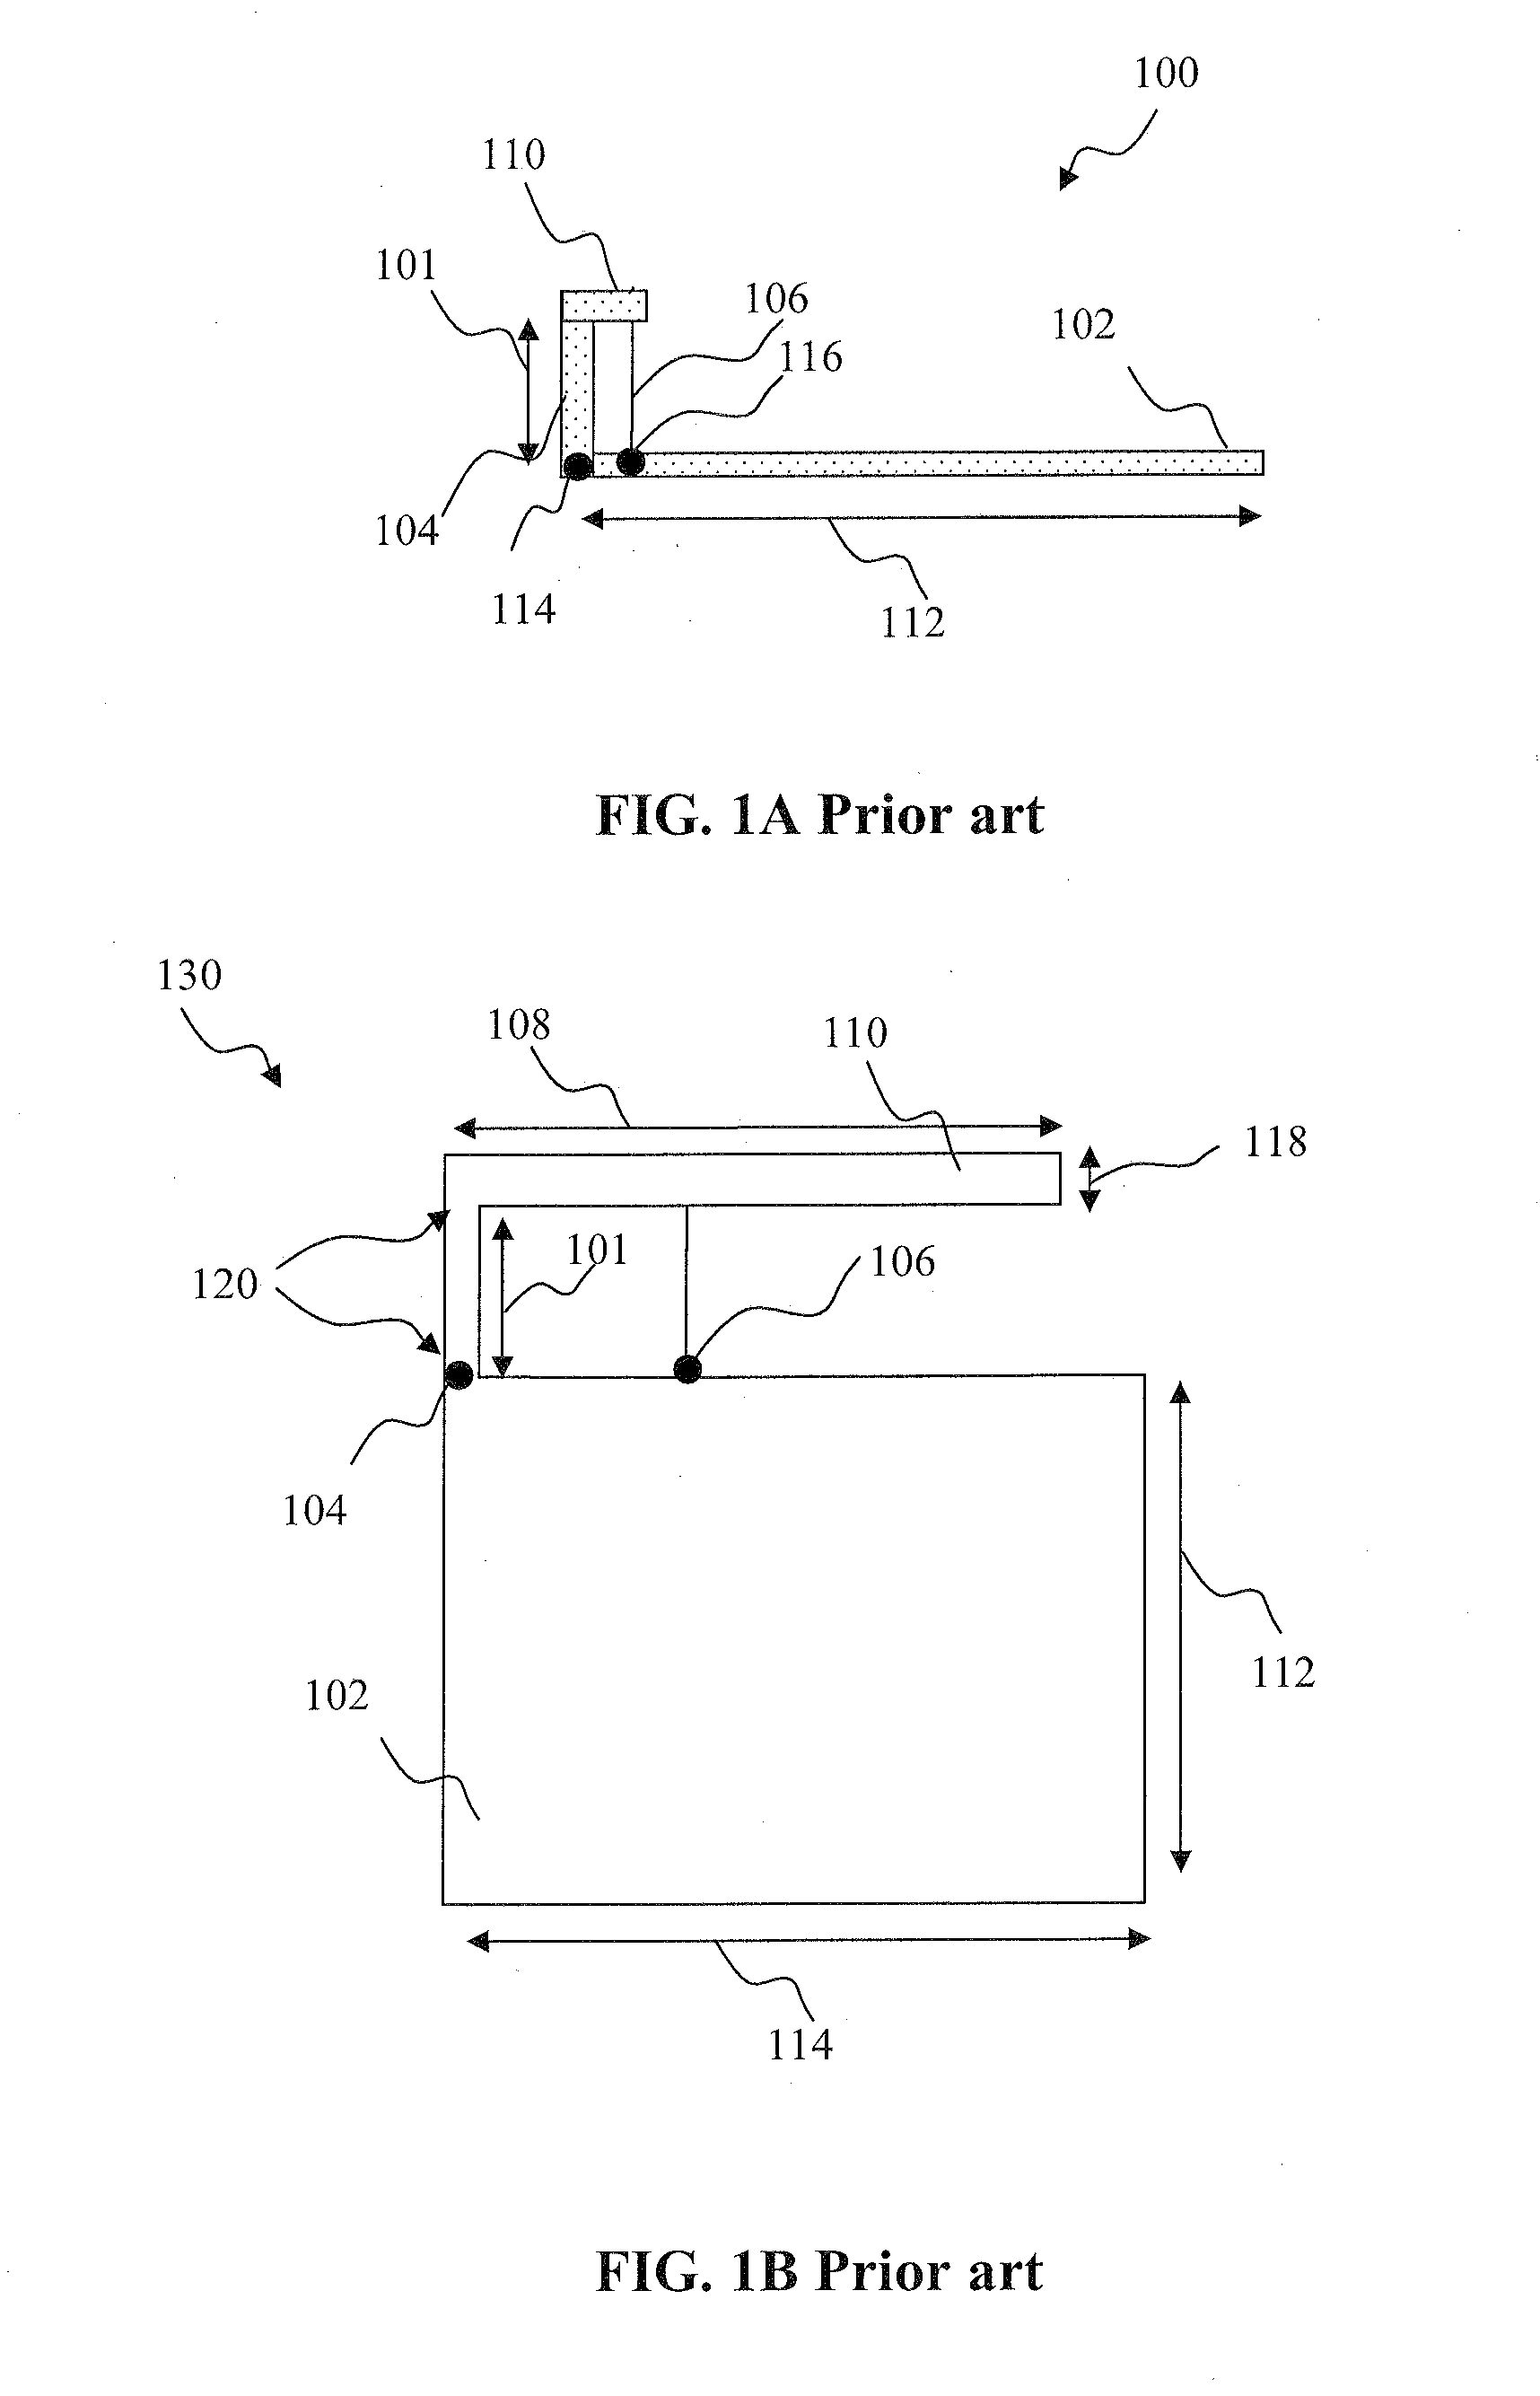 Distributed multiband antenna and methods